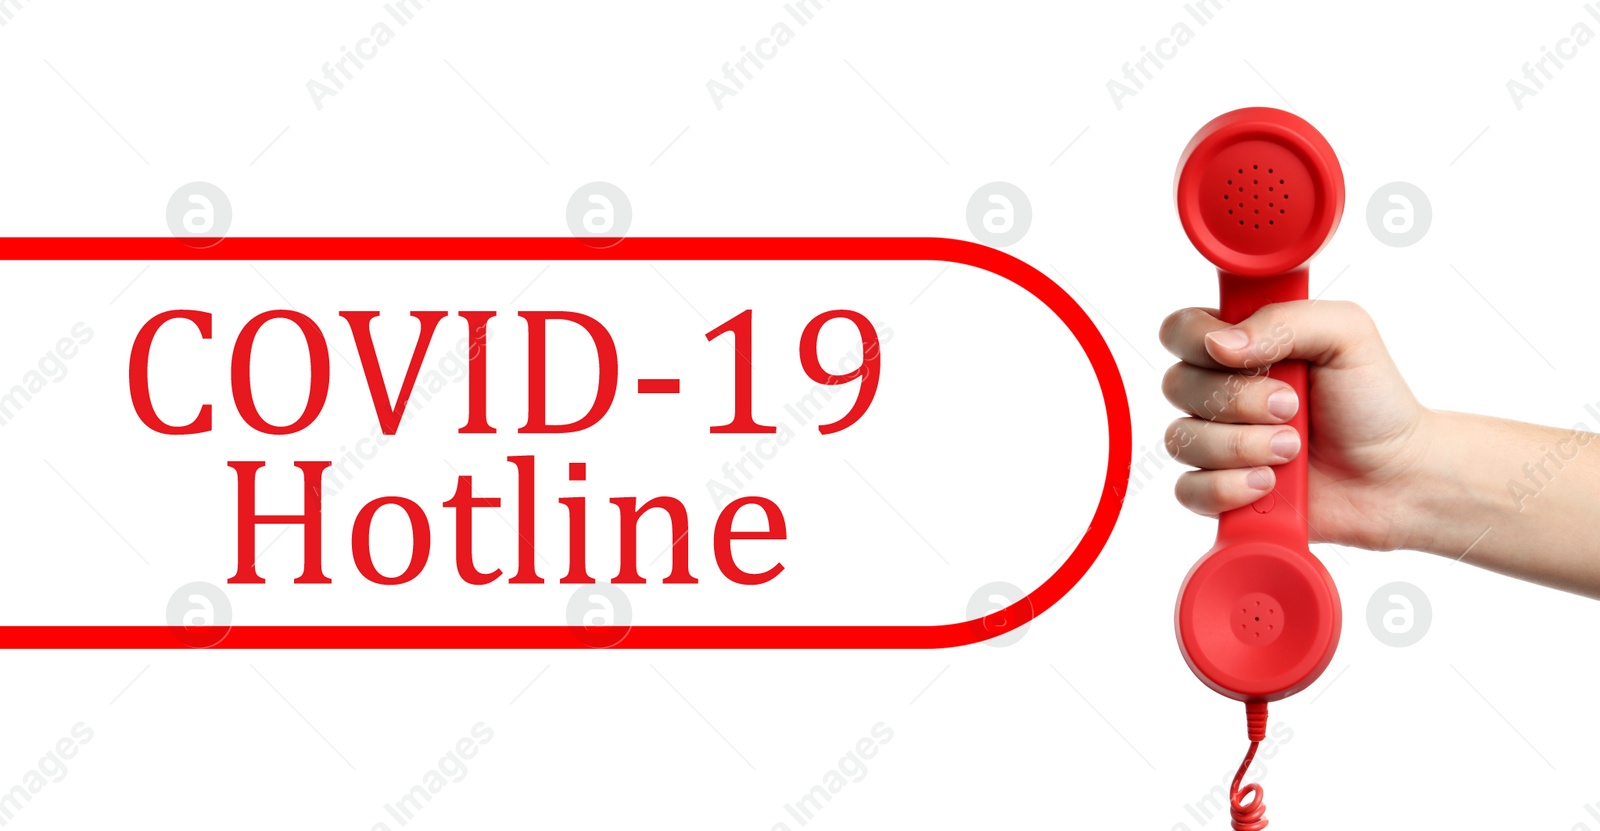 Image of Covid-19 Hotline. Woman with red handset and text on white background, closeup